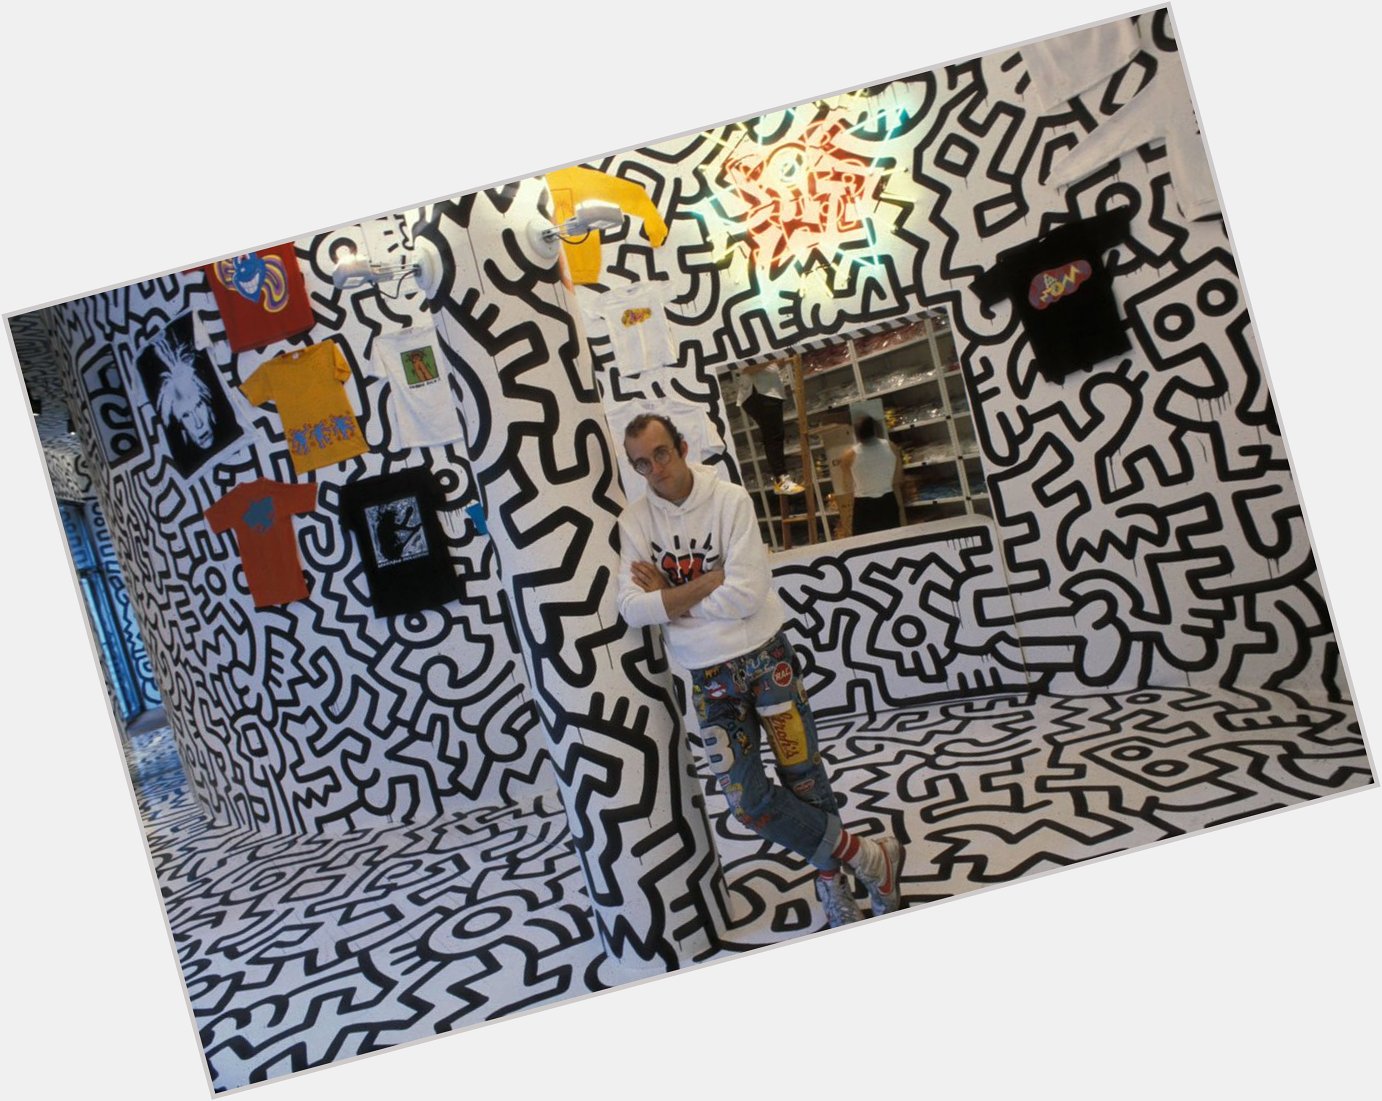 Happy birthday to the legend himself. Rip Keith Haring 